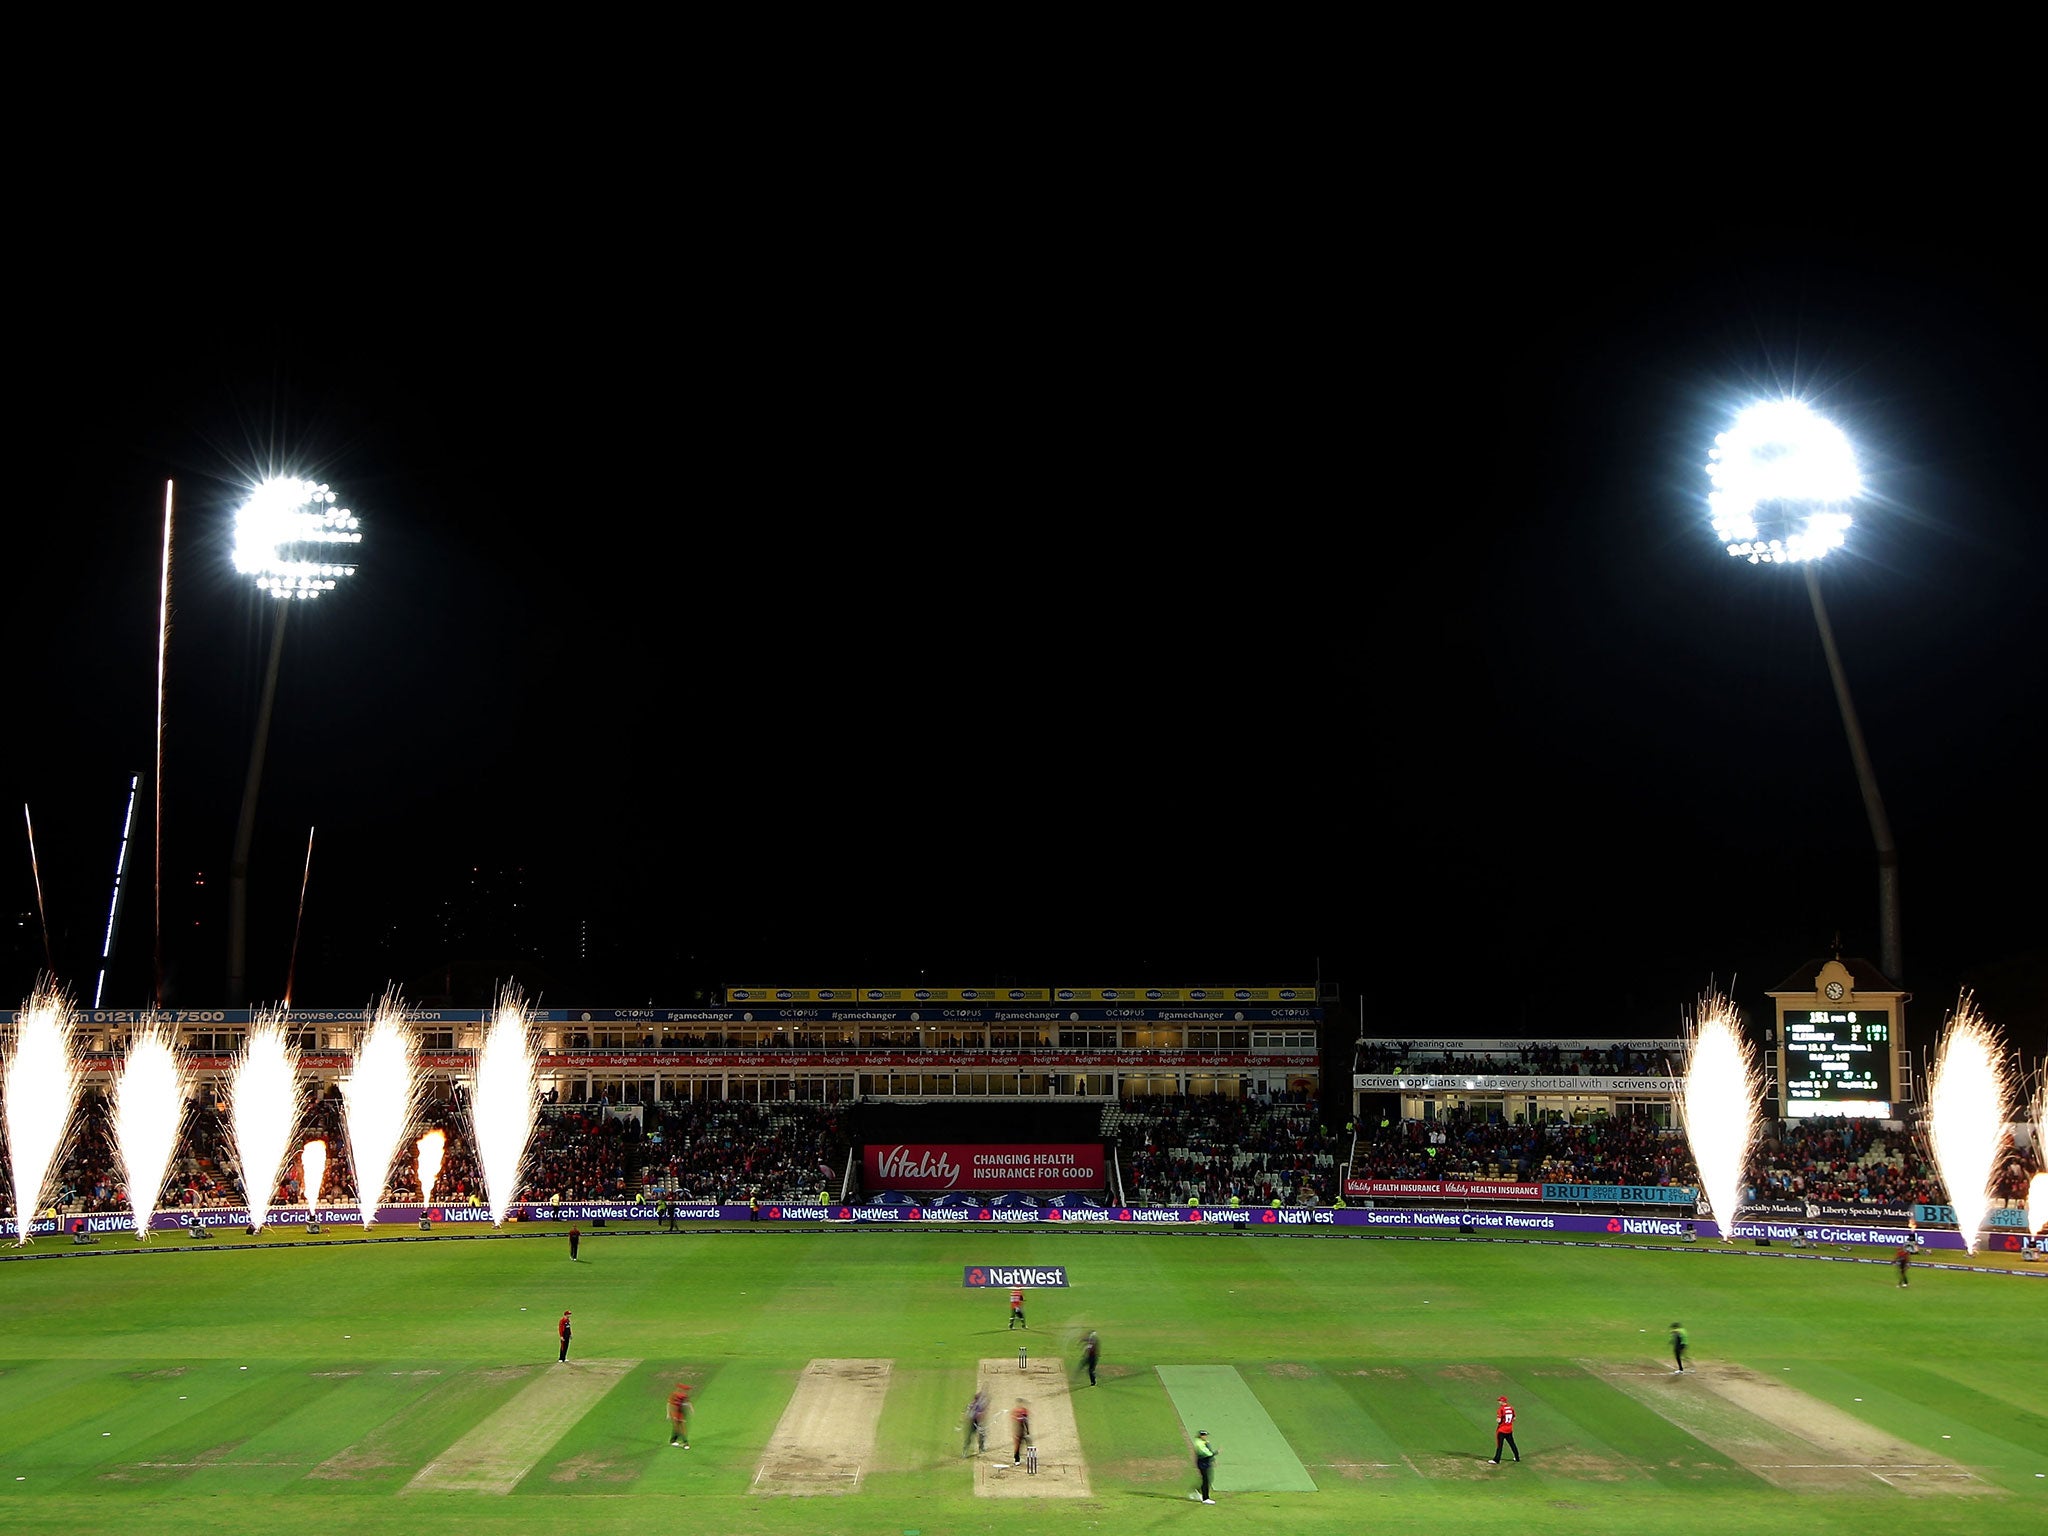 &#13;
Twenty20 cricket could be set to see a new tournament &#13;